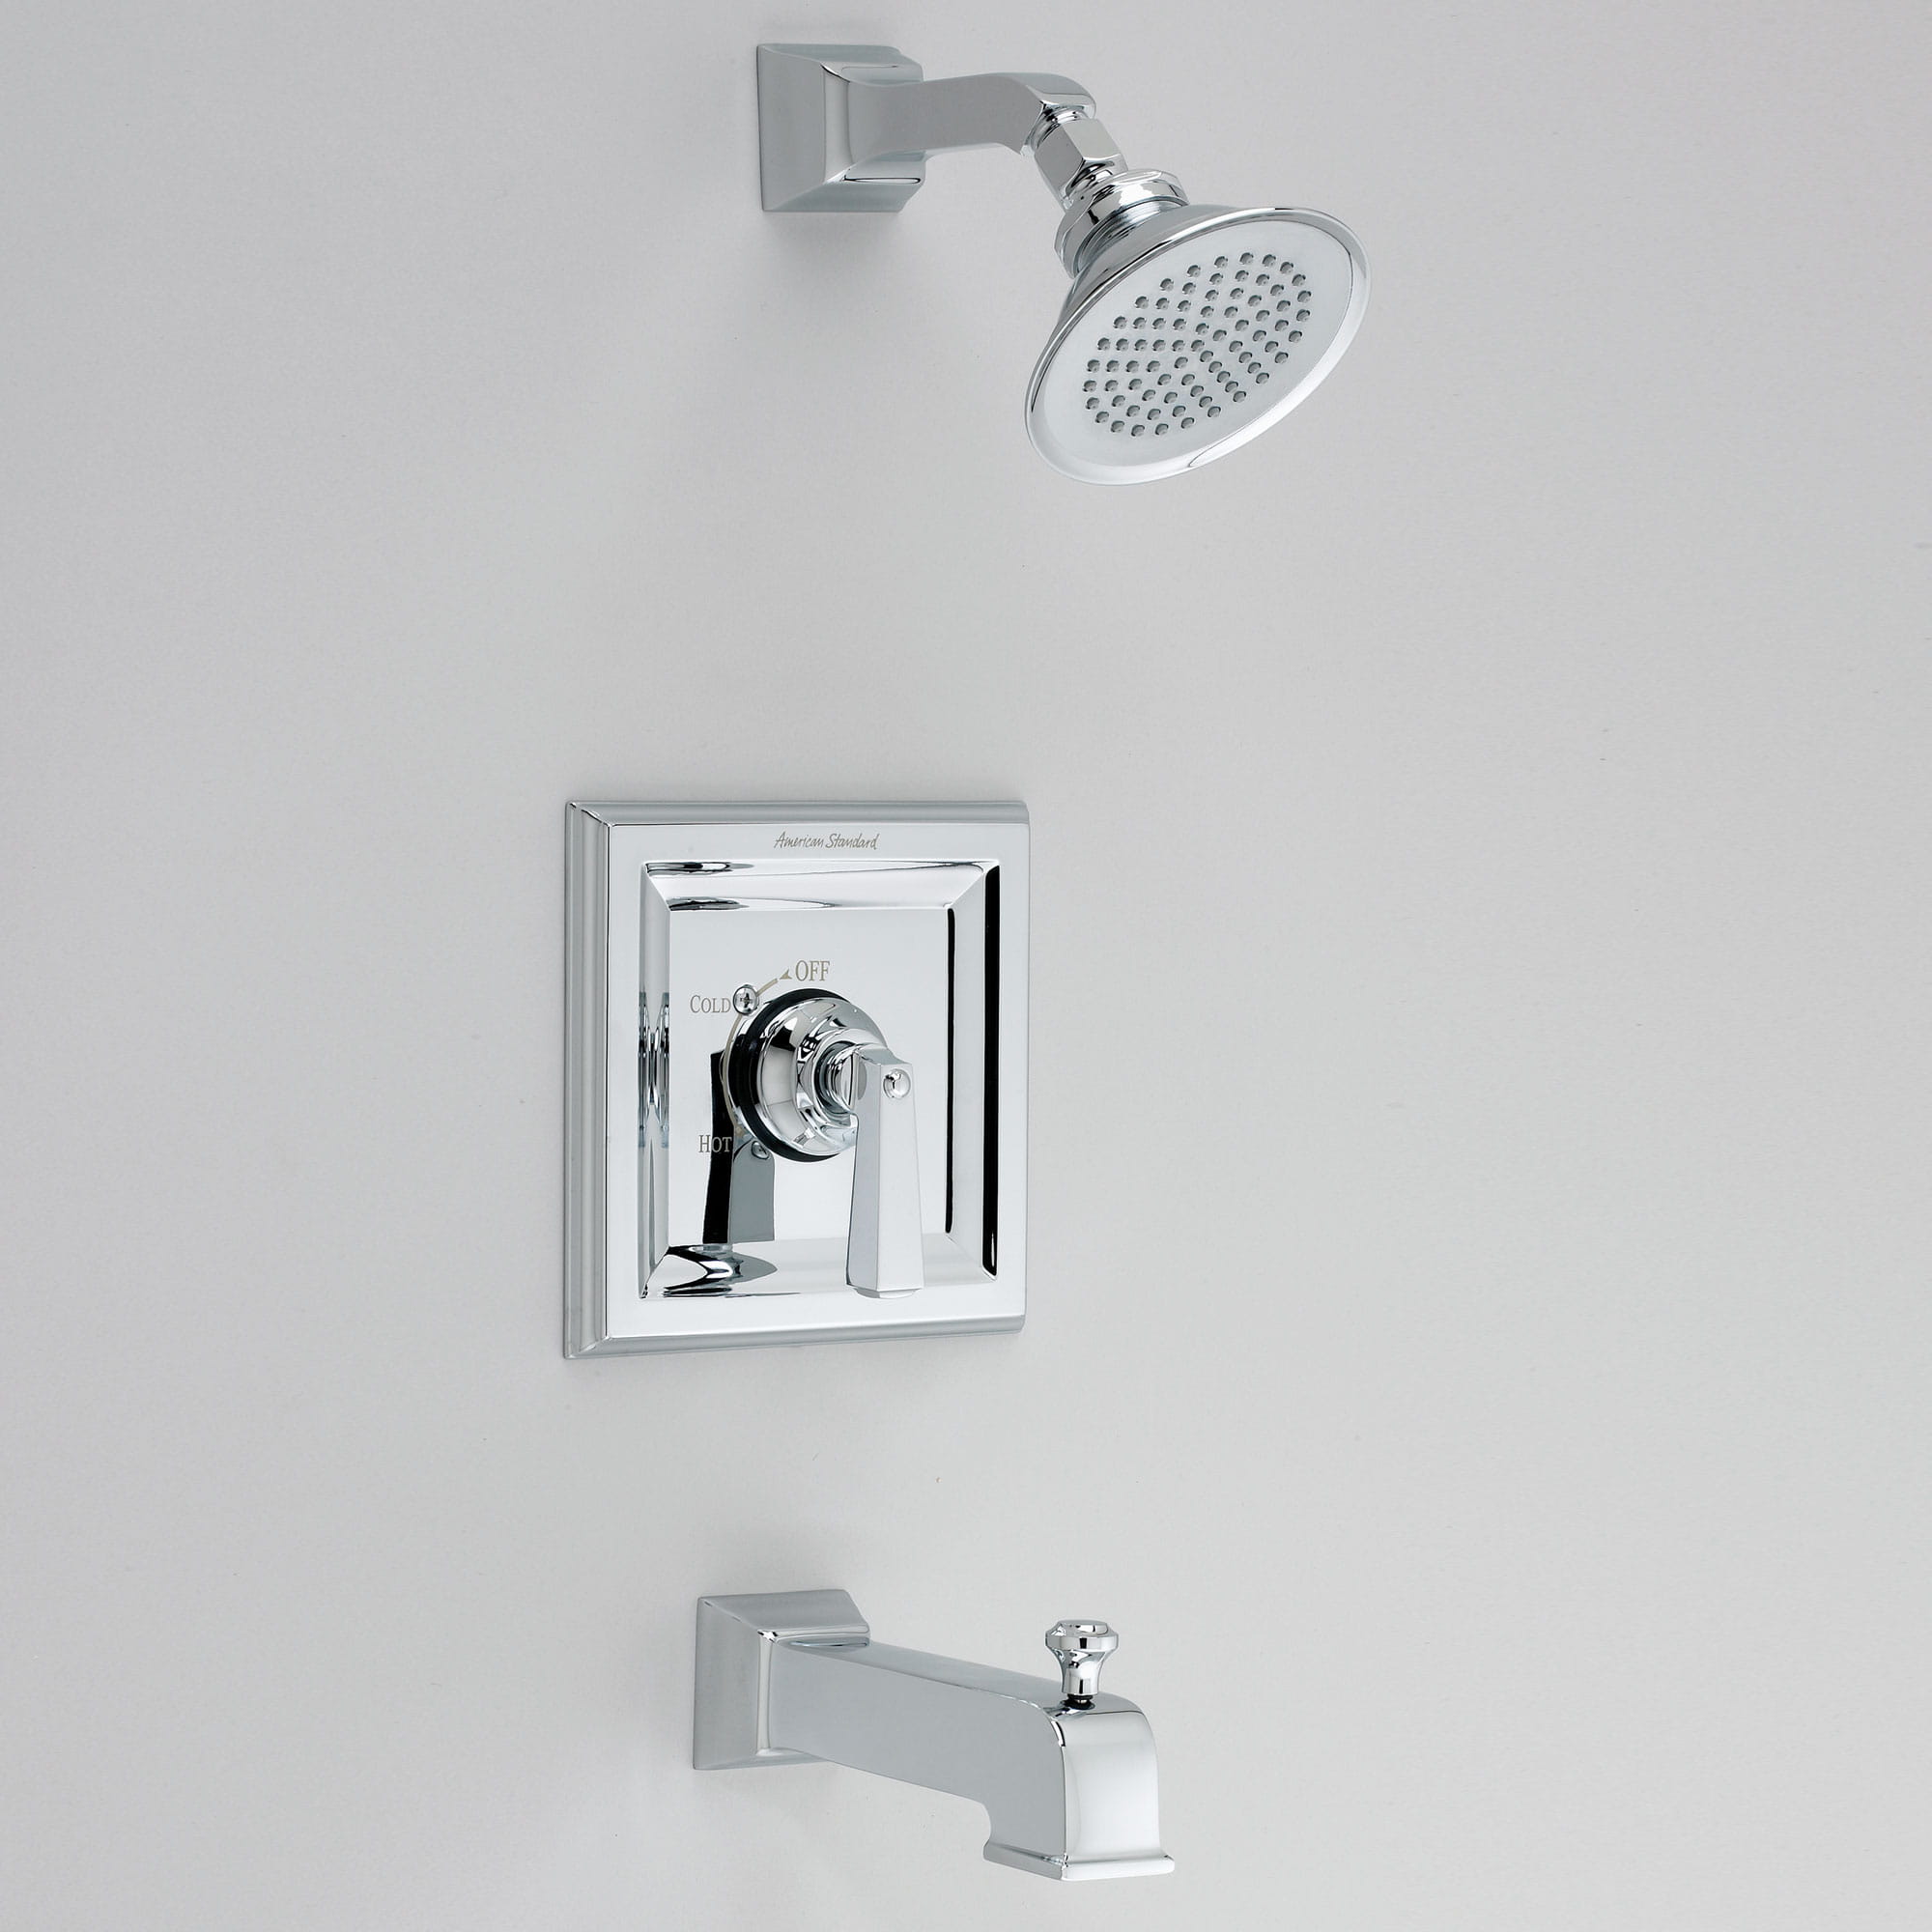 Town Square 2.5 GPM Tub and Shower Trim Kit with Rain Showerhead and Lever Handle